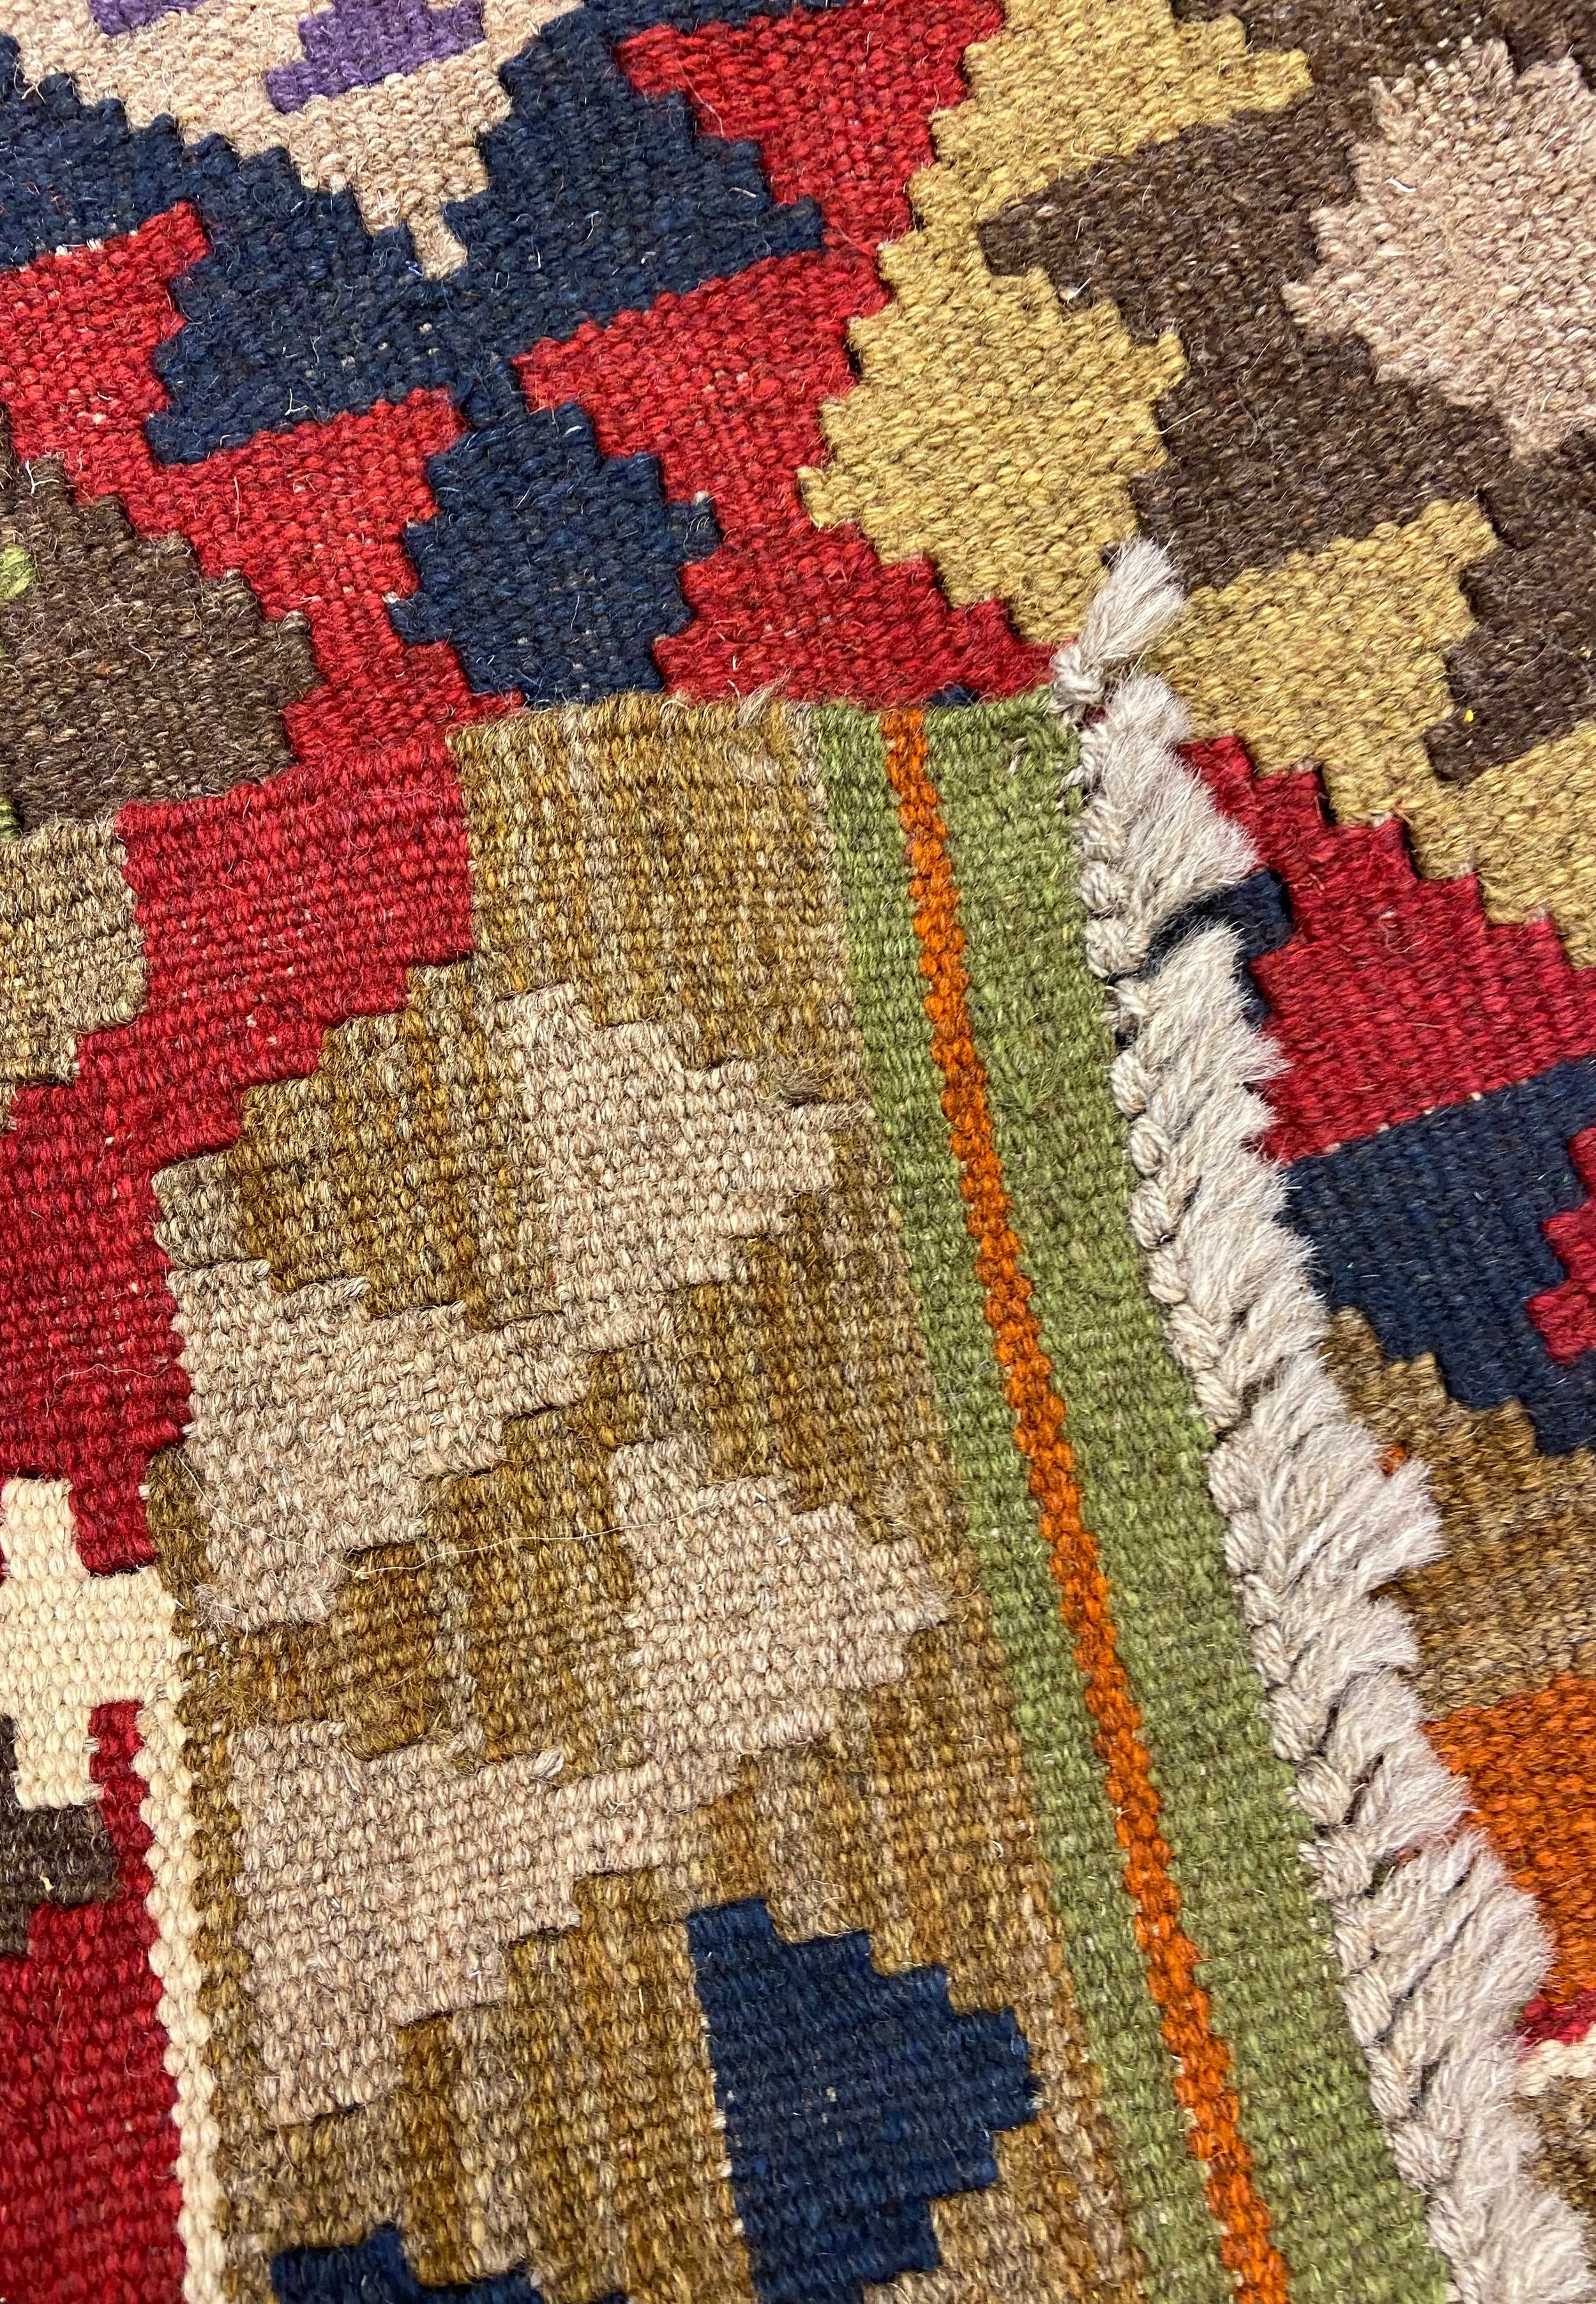 100% hand knotted woollen rug 'Maimana Kilim' [146x100cm] - Image 2 of 3